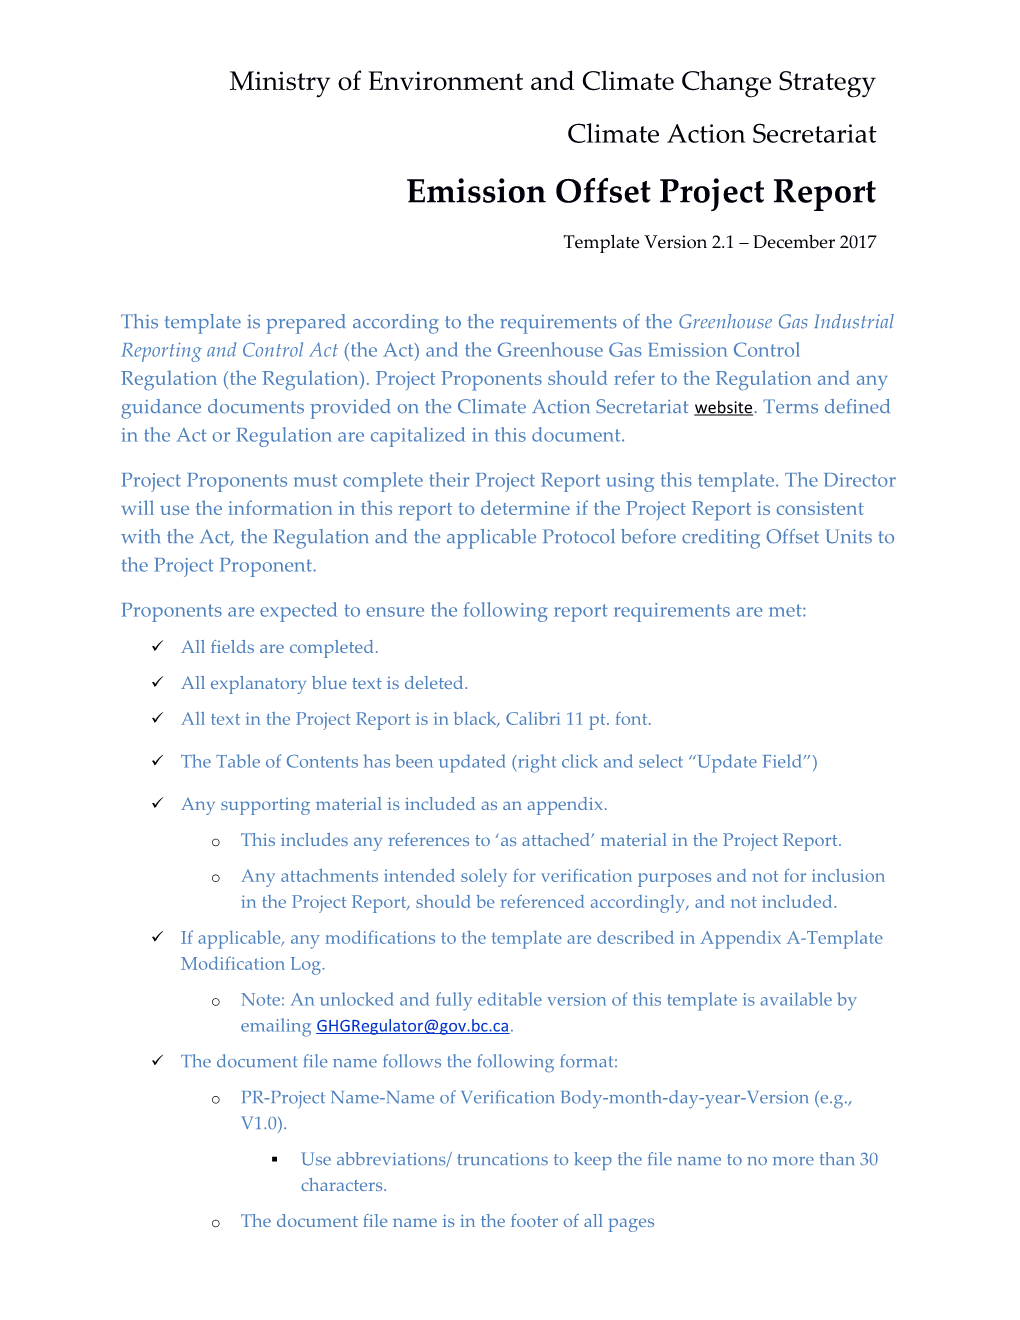 Proponents Are Expected to Ensure the Following Report Requirements Are Met